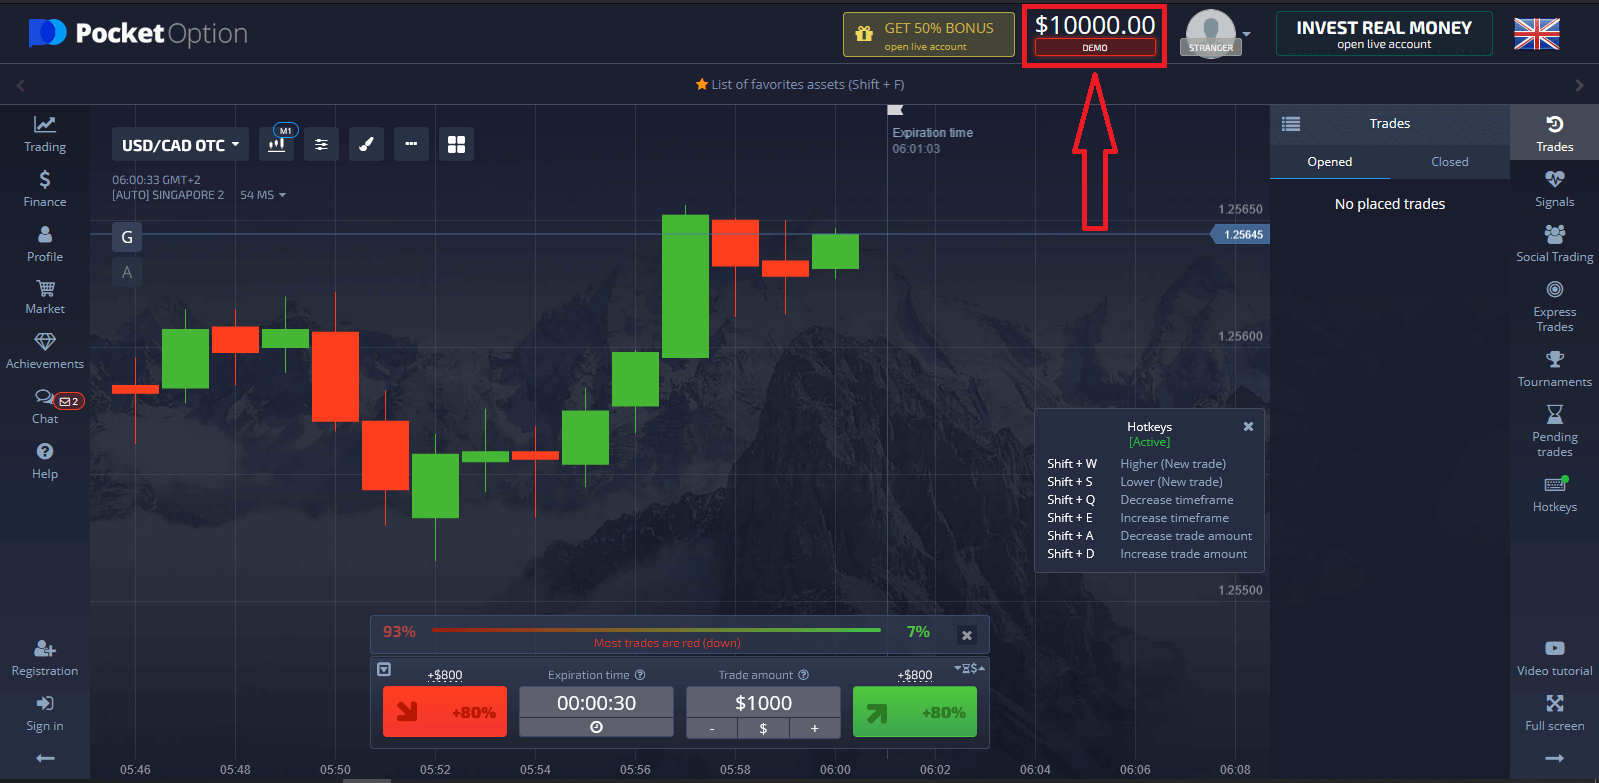 How to start Pocket Option Trading in 2021: A Step-By-Step Guide for Beginners